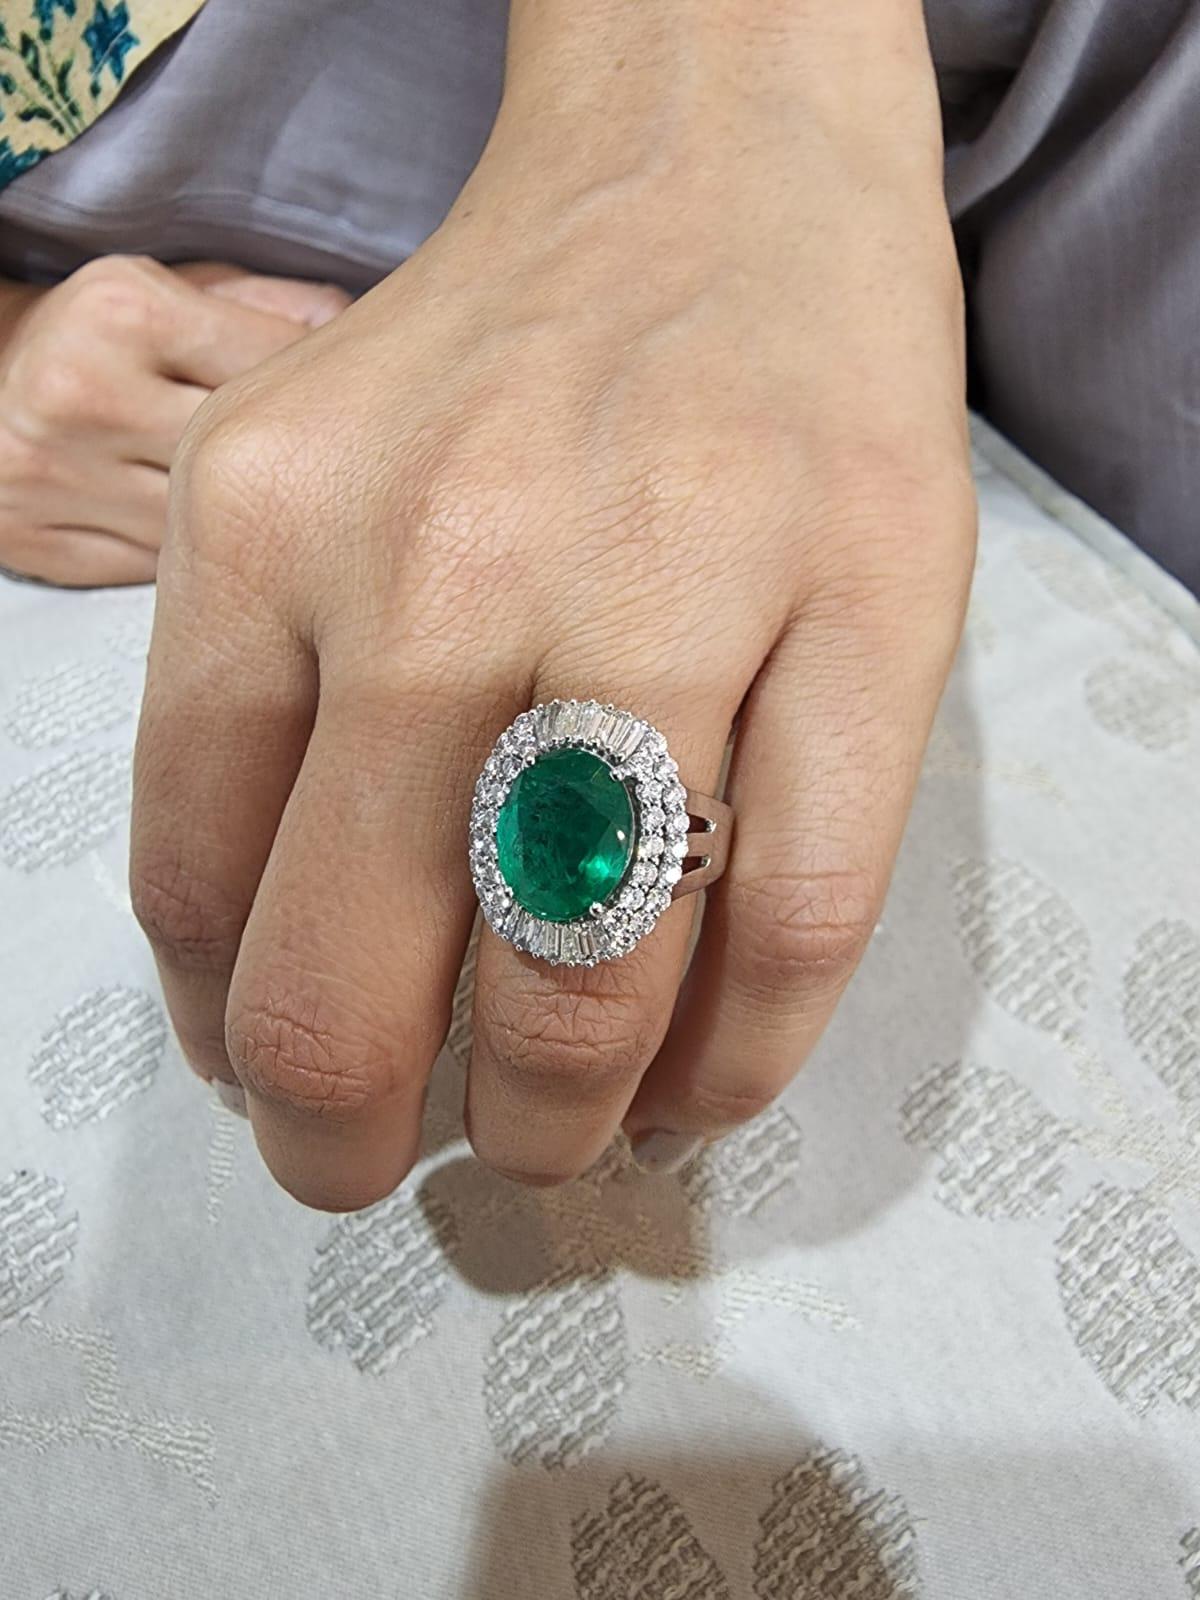 This is a natural Zambian Emerald ring with diamonds and 14k gold. the emeralds are of very high quality and very good quality diamonds. the clarity is ( vsi) and colour is G 

emeralds : 4.54 CT’s
diamond : 1.47 CT’s
gold : 7.39 gems
It’s very hard